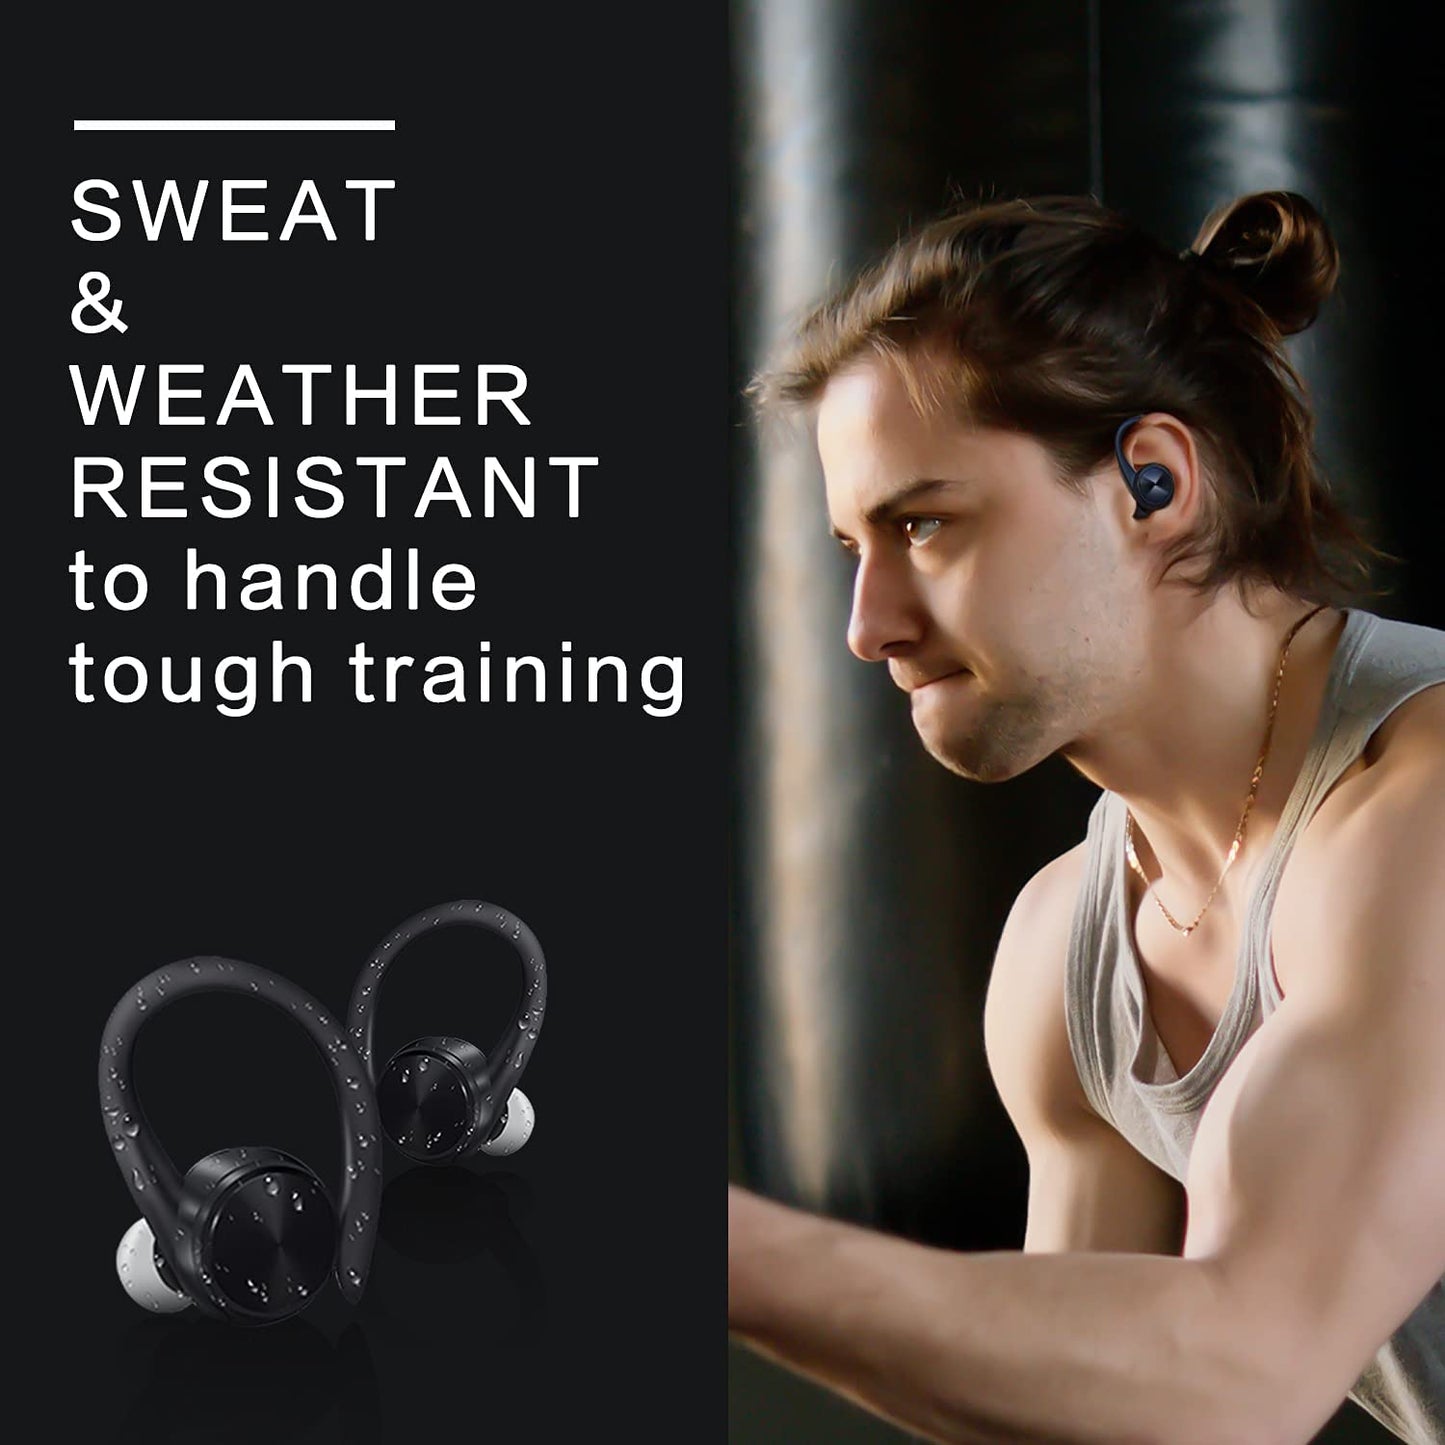 Bluetooth T26 True Wireless Earphones Auto Pairing Bluetooth 5.1 Headphones,Wireless Ear-Hook Running Sports Headphones,Compatible with Ios&Android Devices